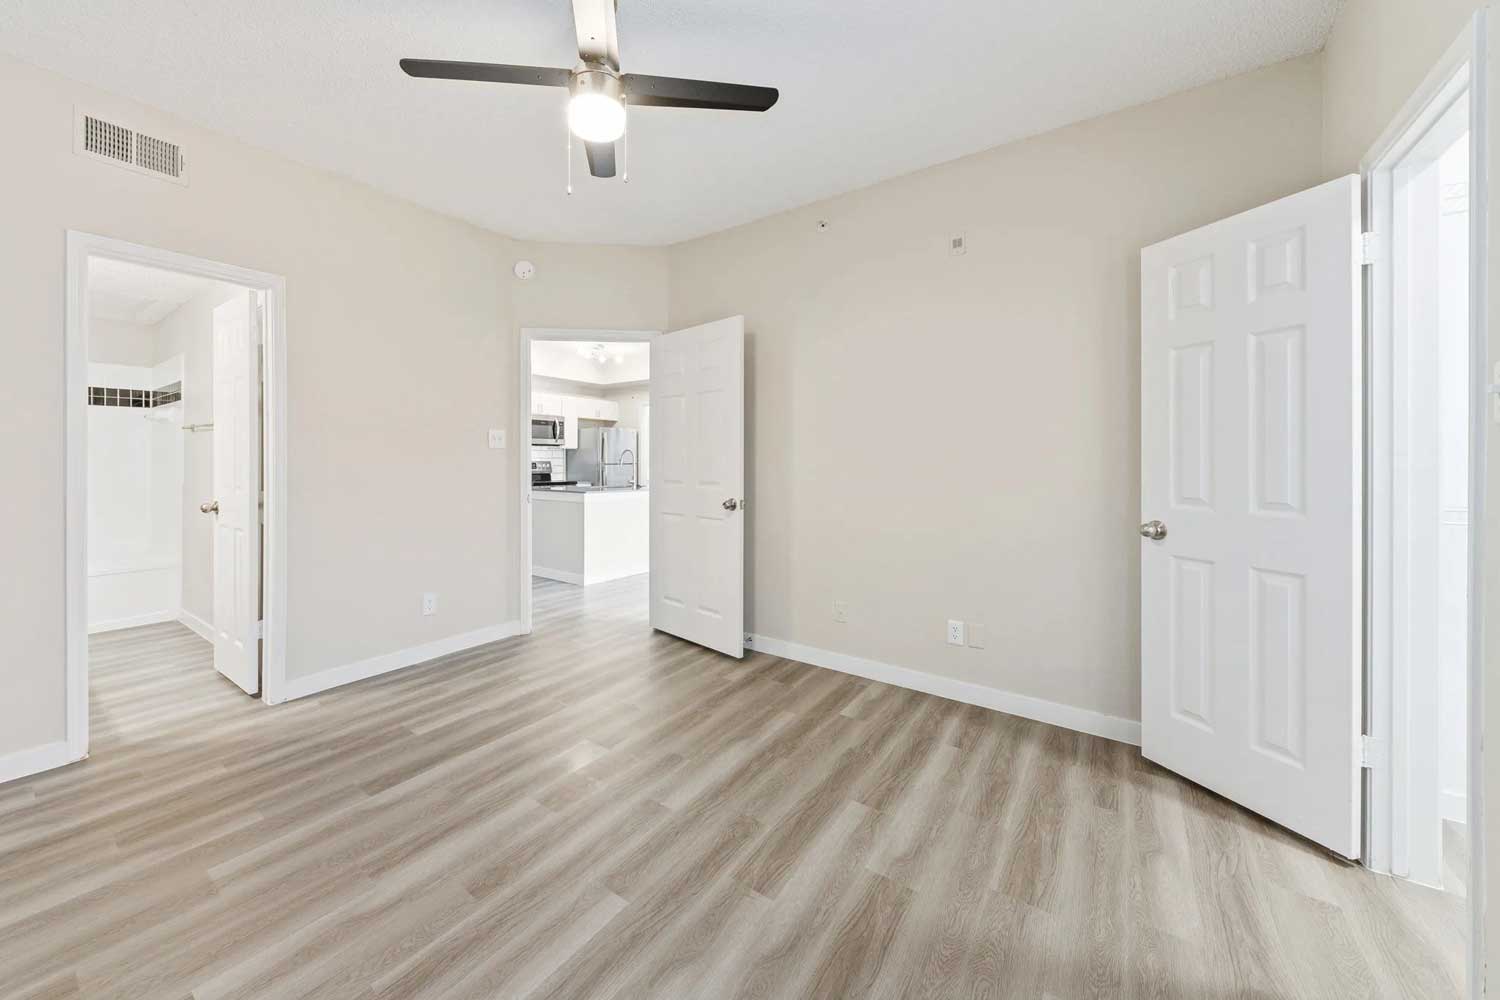 Wood Flooring and Light Ceiling Fan